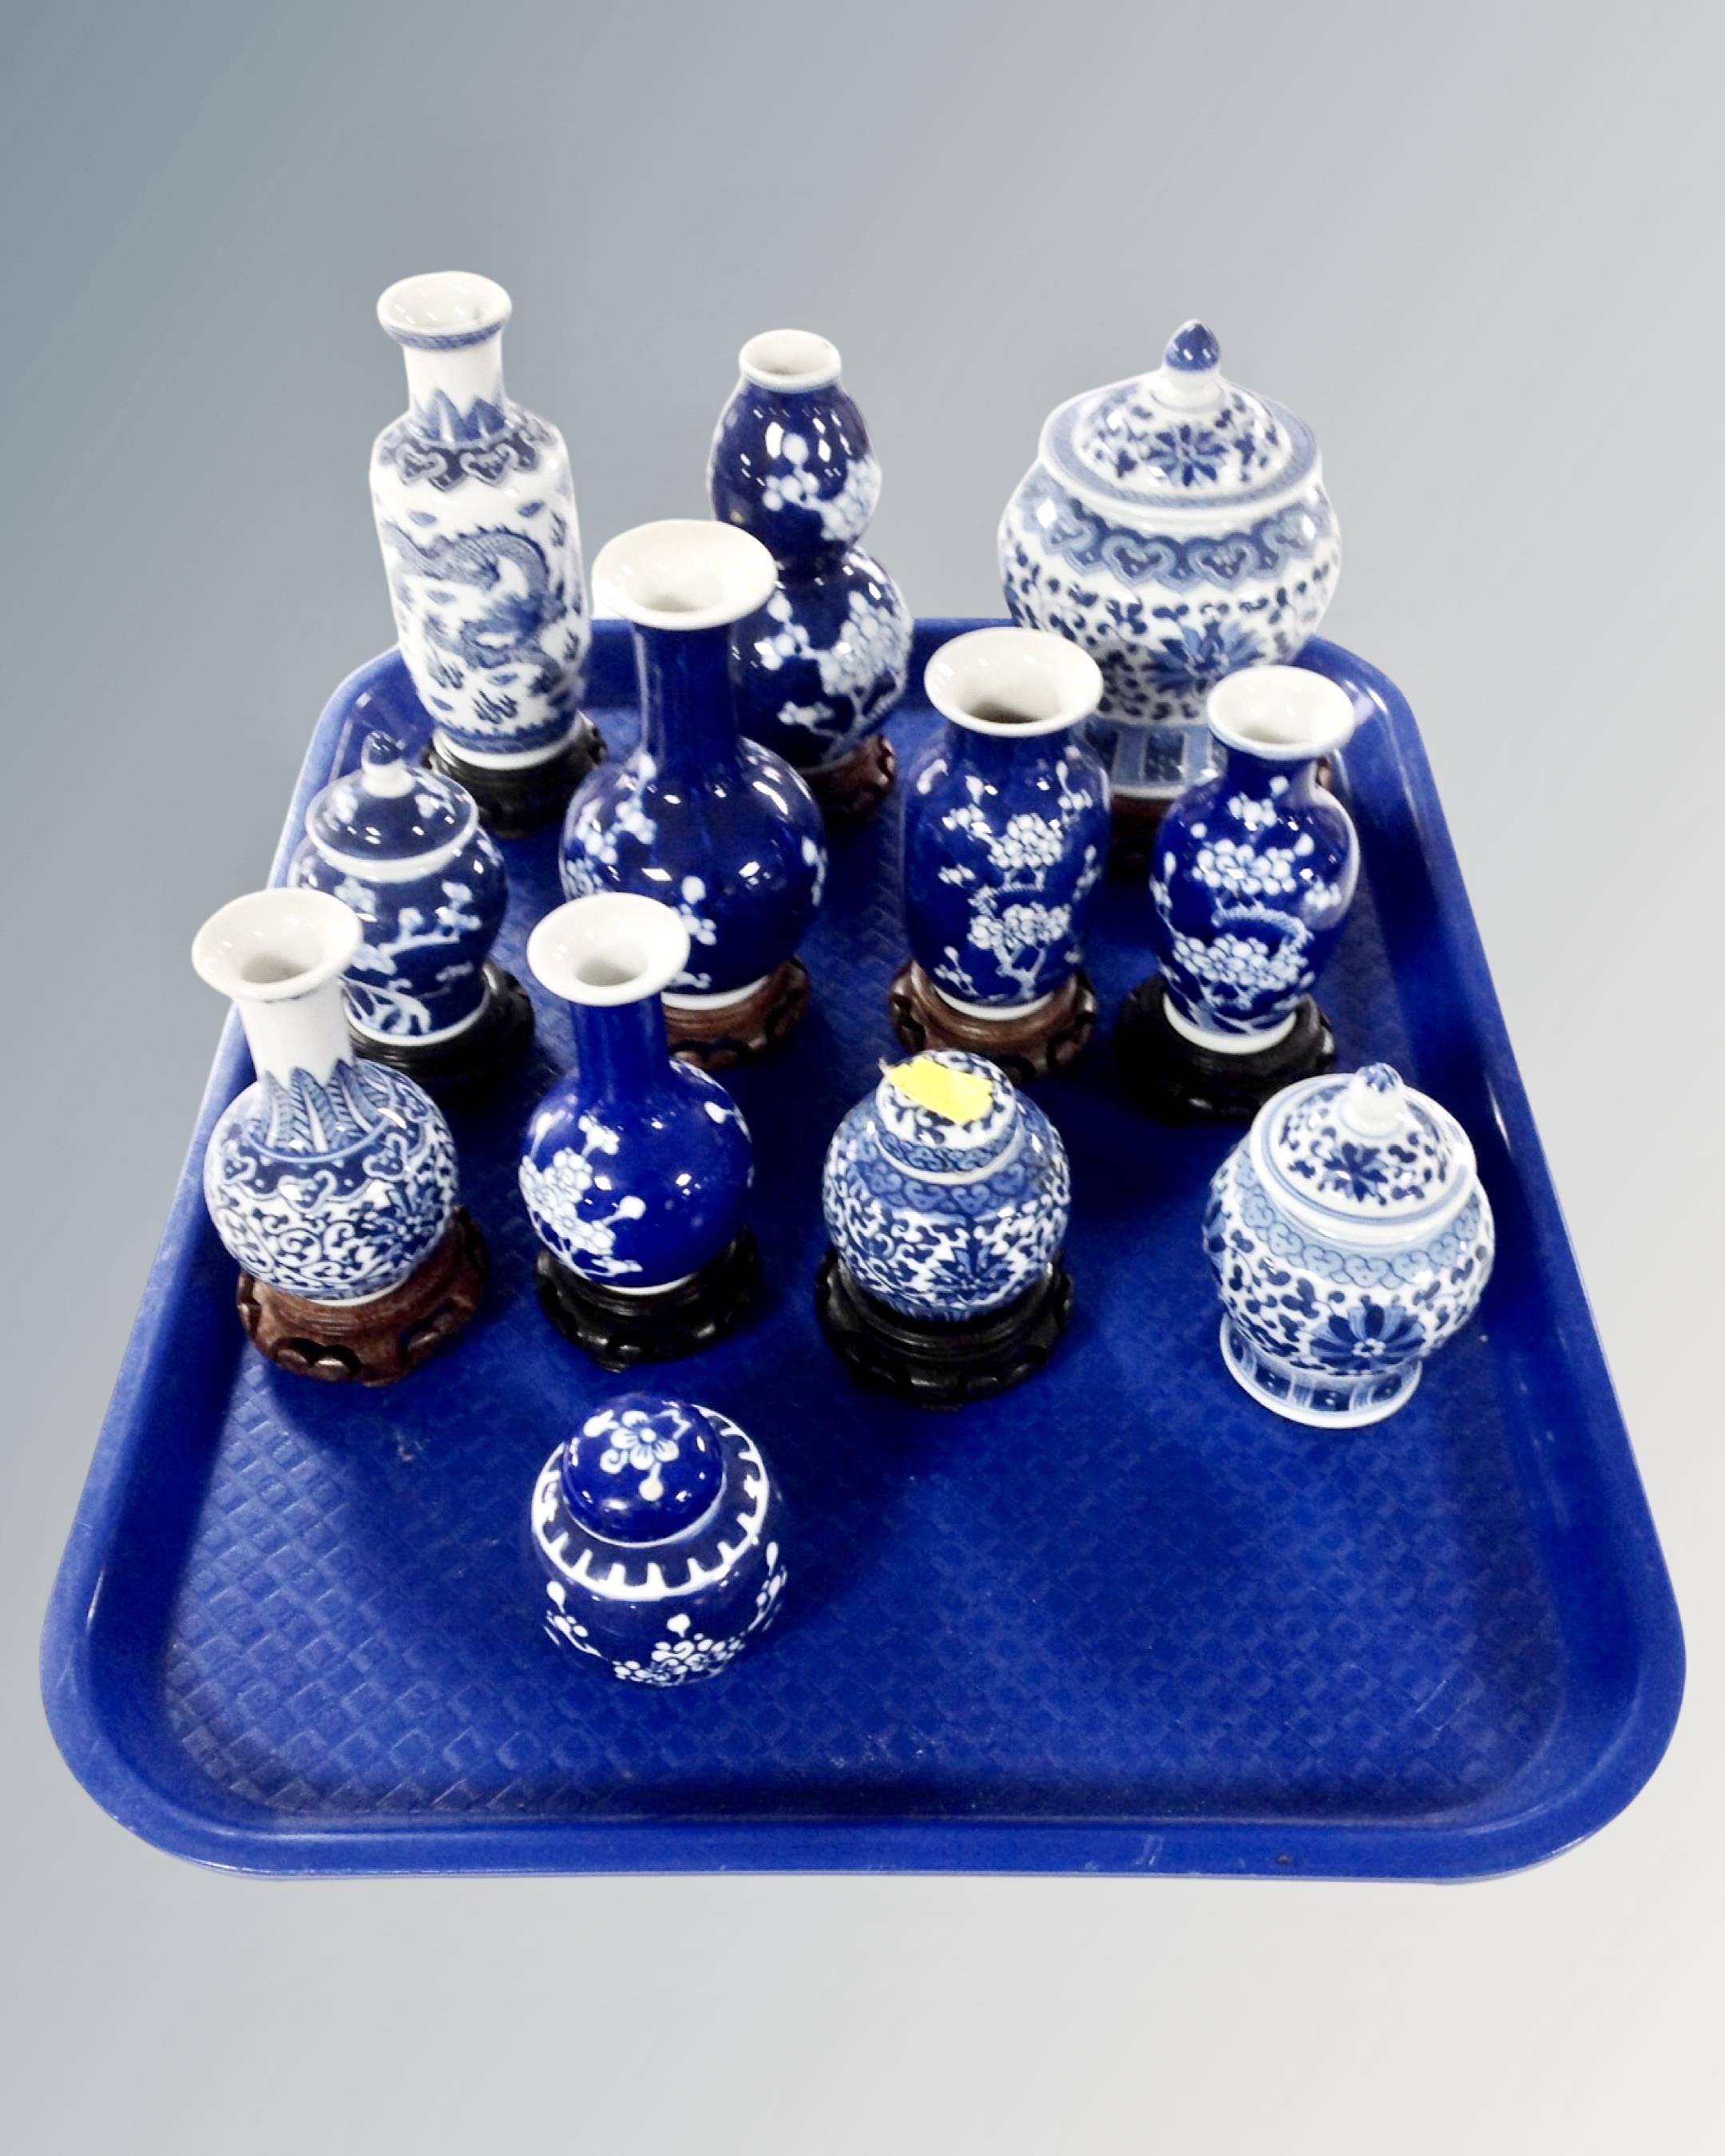 A tray containing 12 assorted Chinese blue and white vases and lidded ginger jars.